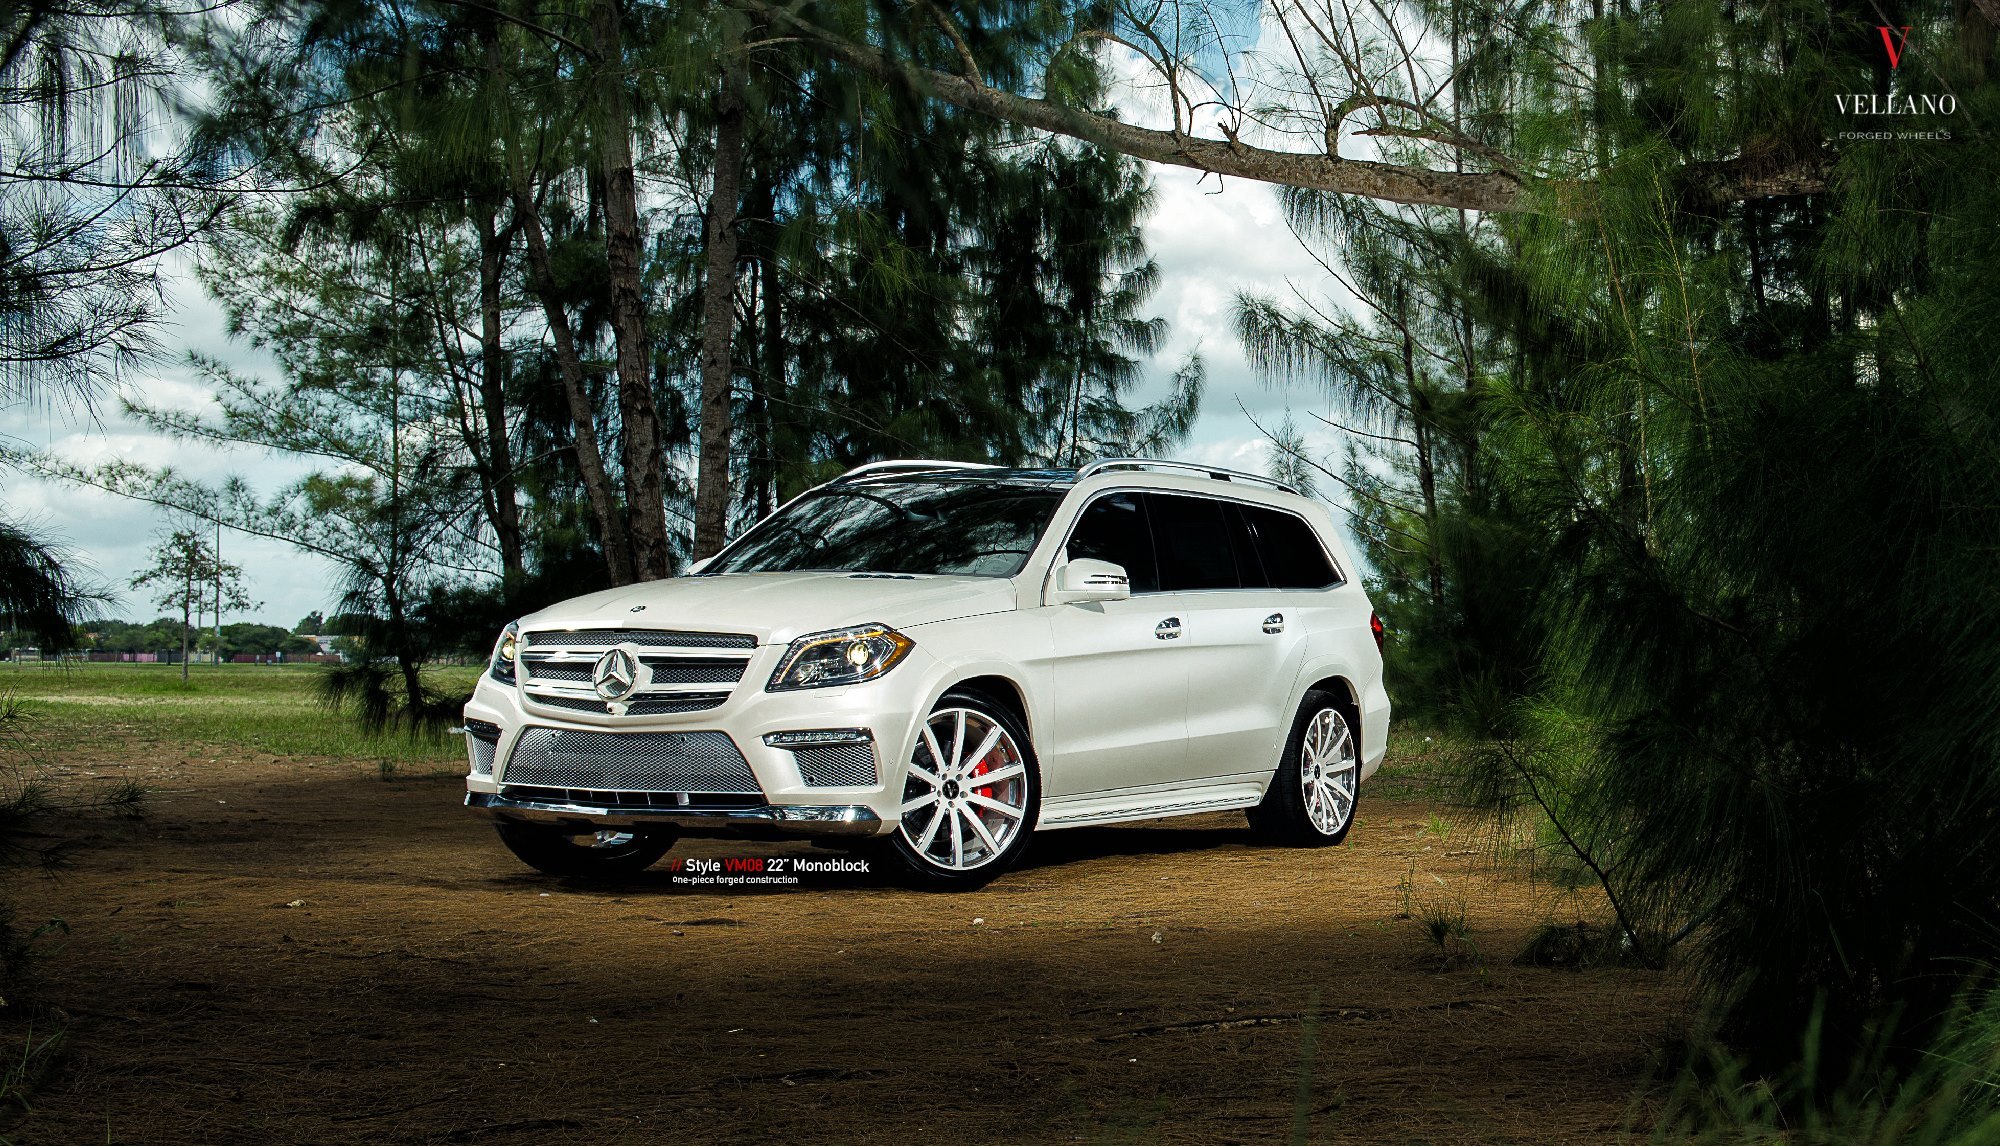 Chrome Mesh Grille on White Mercedes GL Class - Photo by Vellano